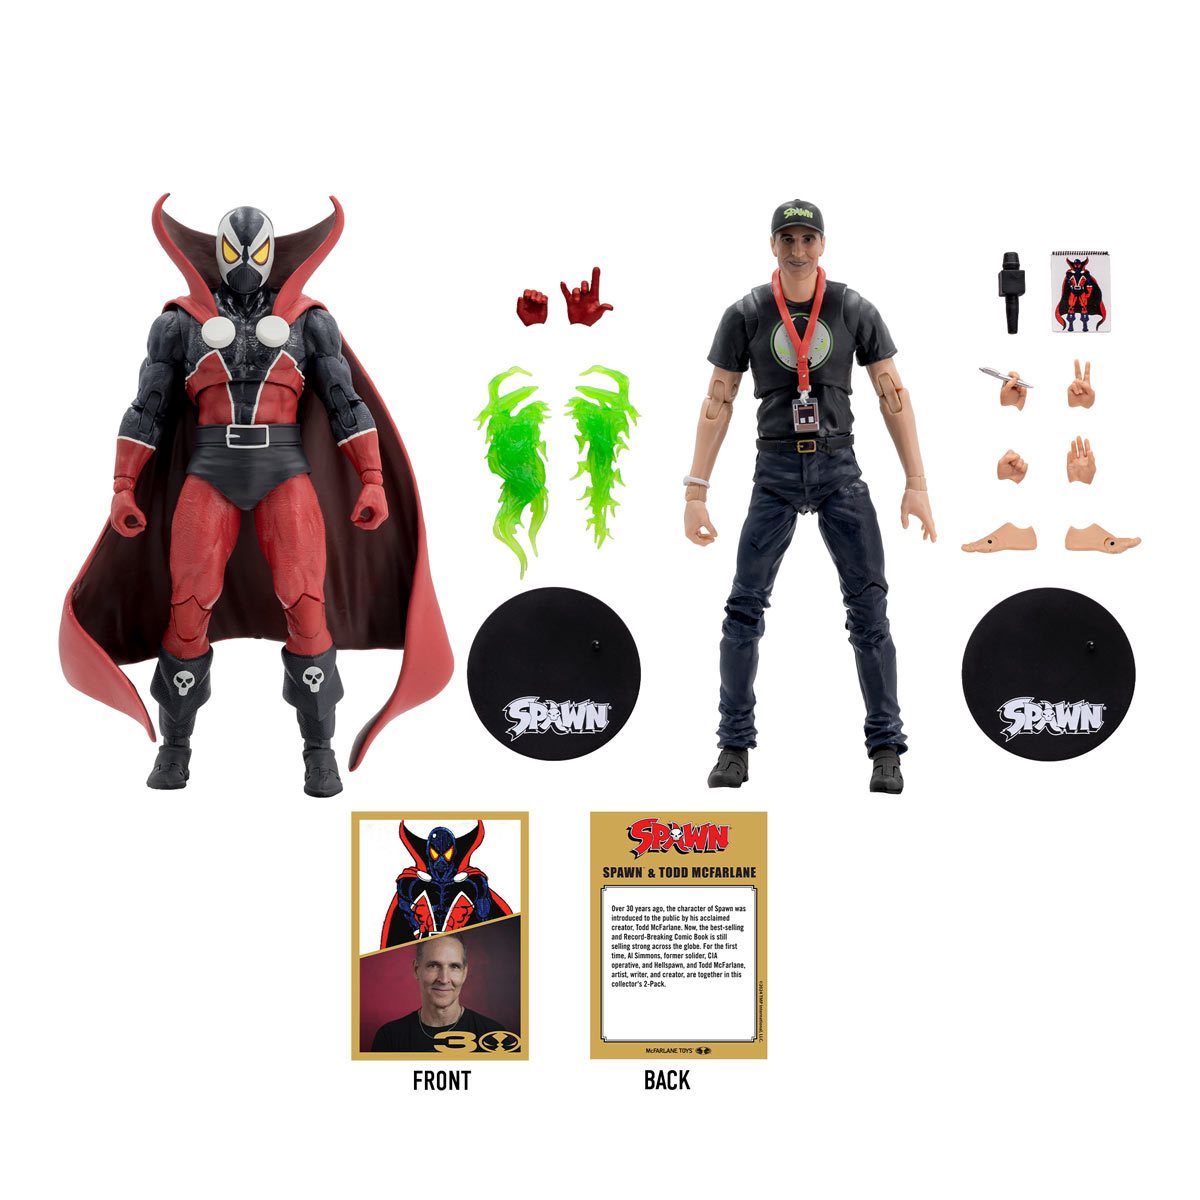 30th Anniversary of Spawn by Todd McFarlane Featuring The 2-Pack 7-inch Scale Set